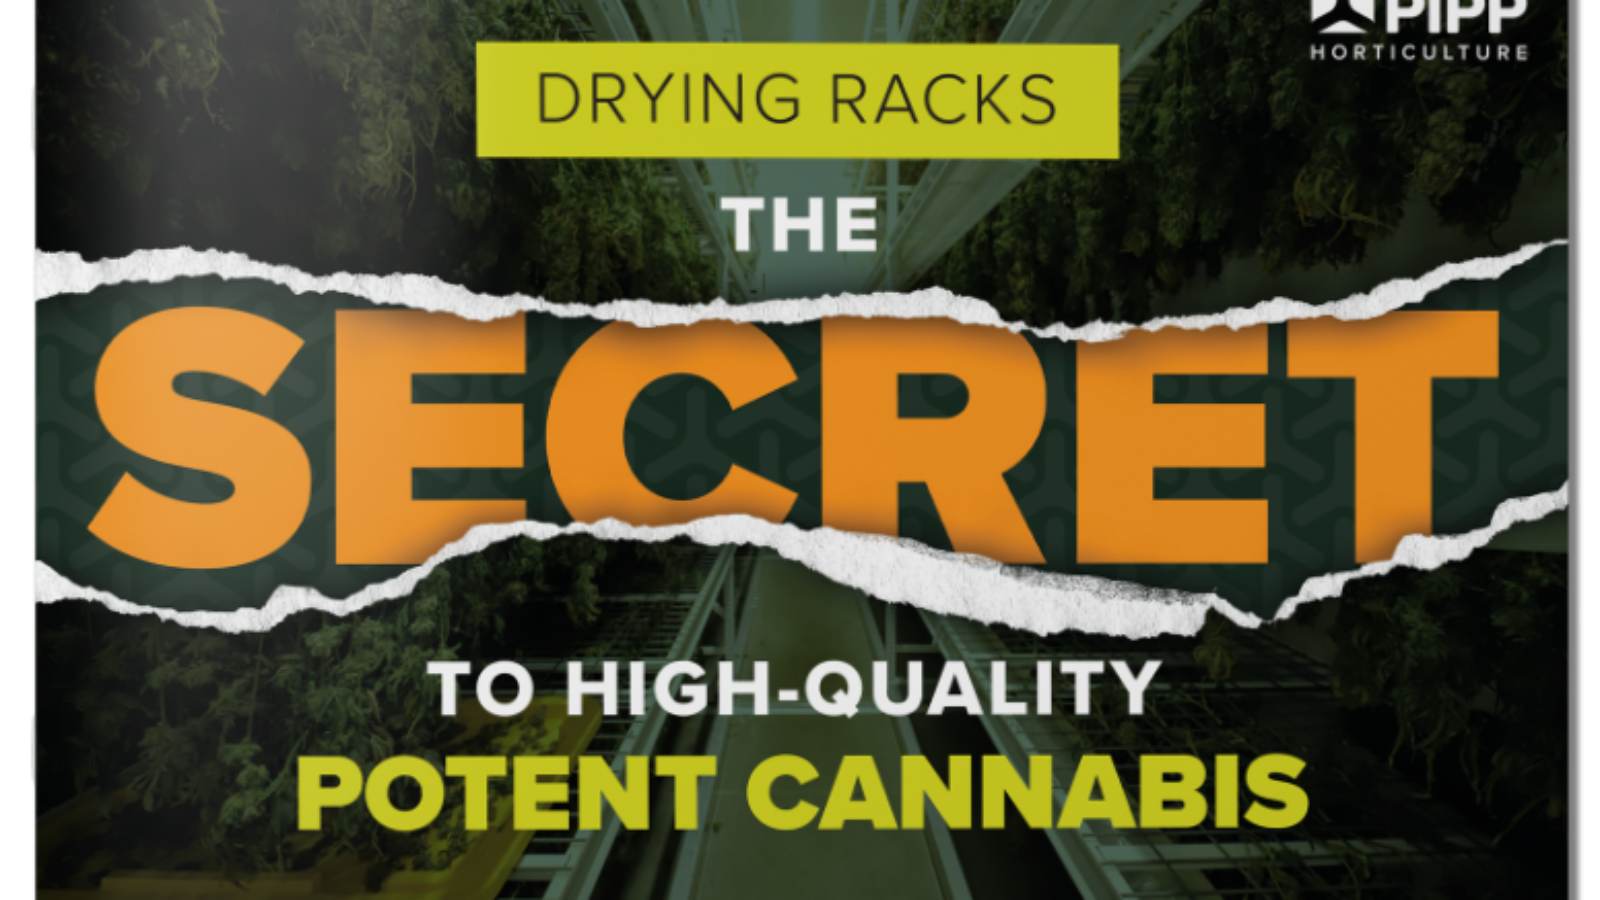 Drying Racks: The Secret to High-Quality, Potent Cannabis